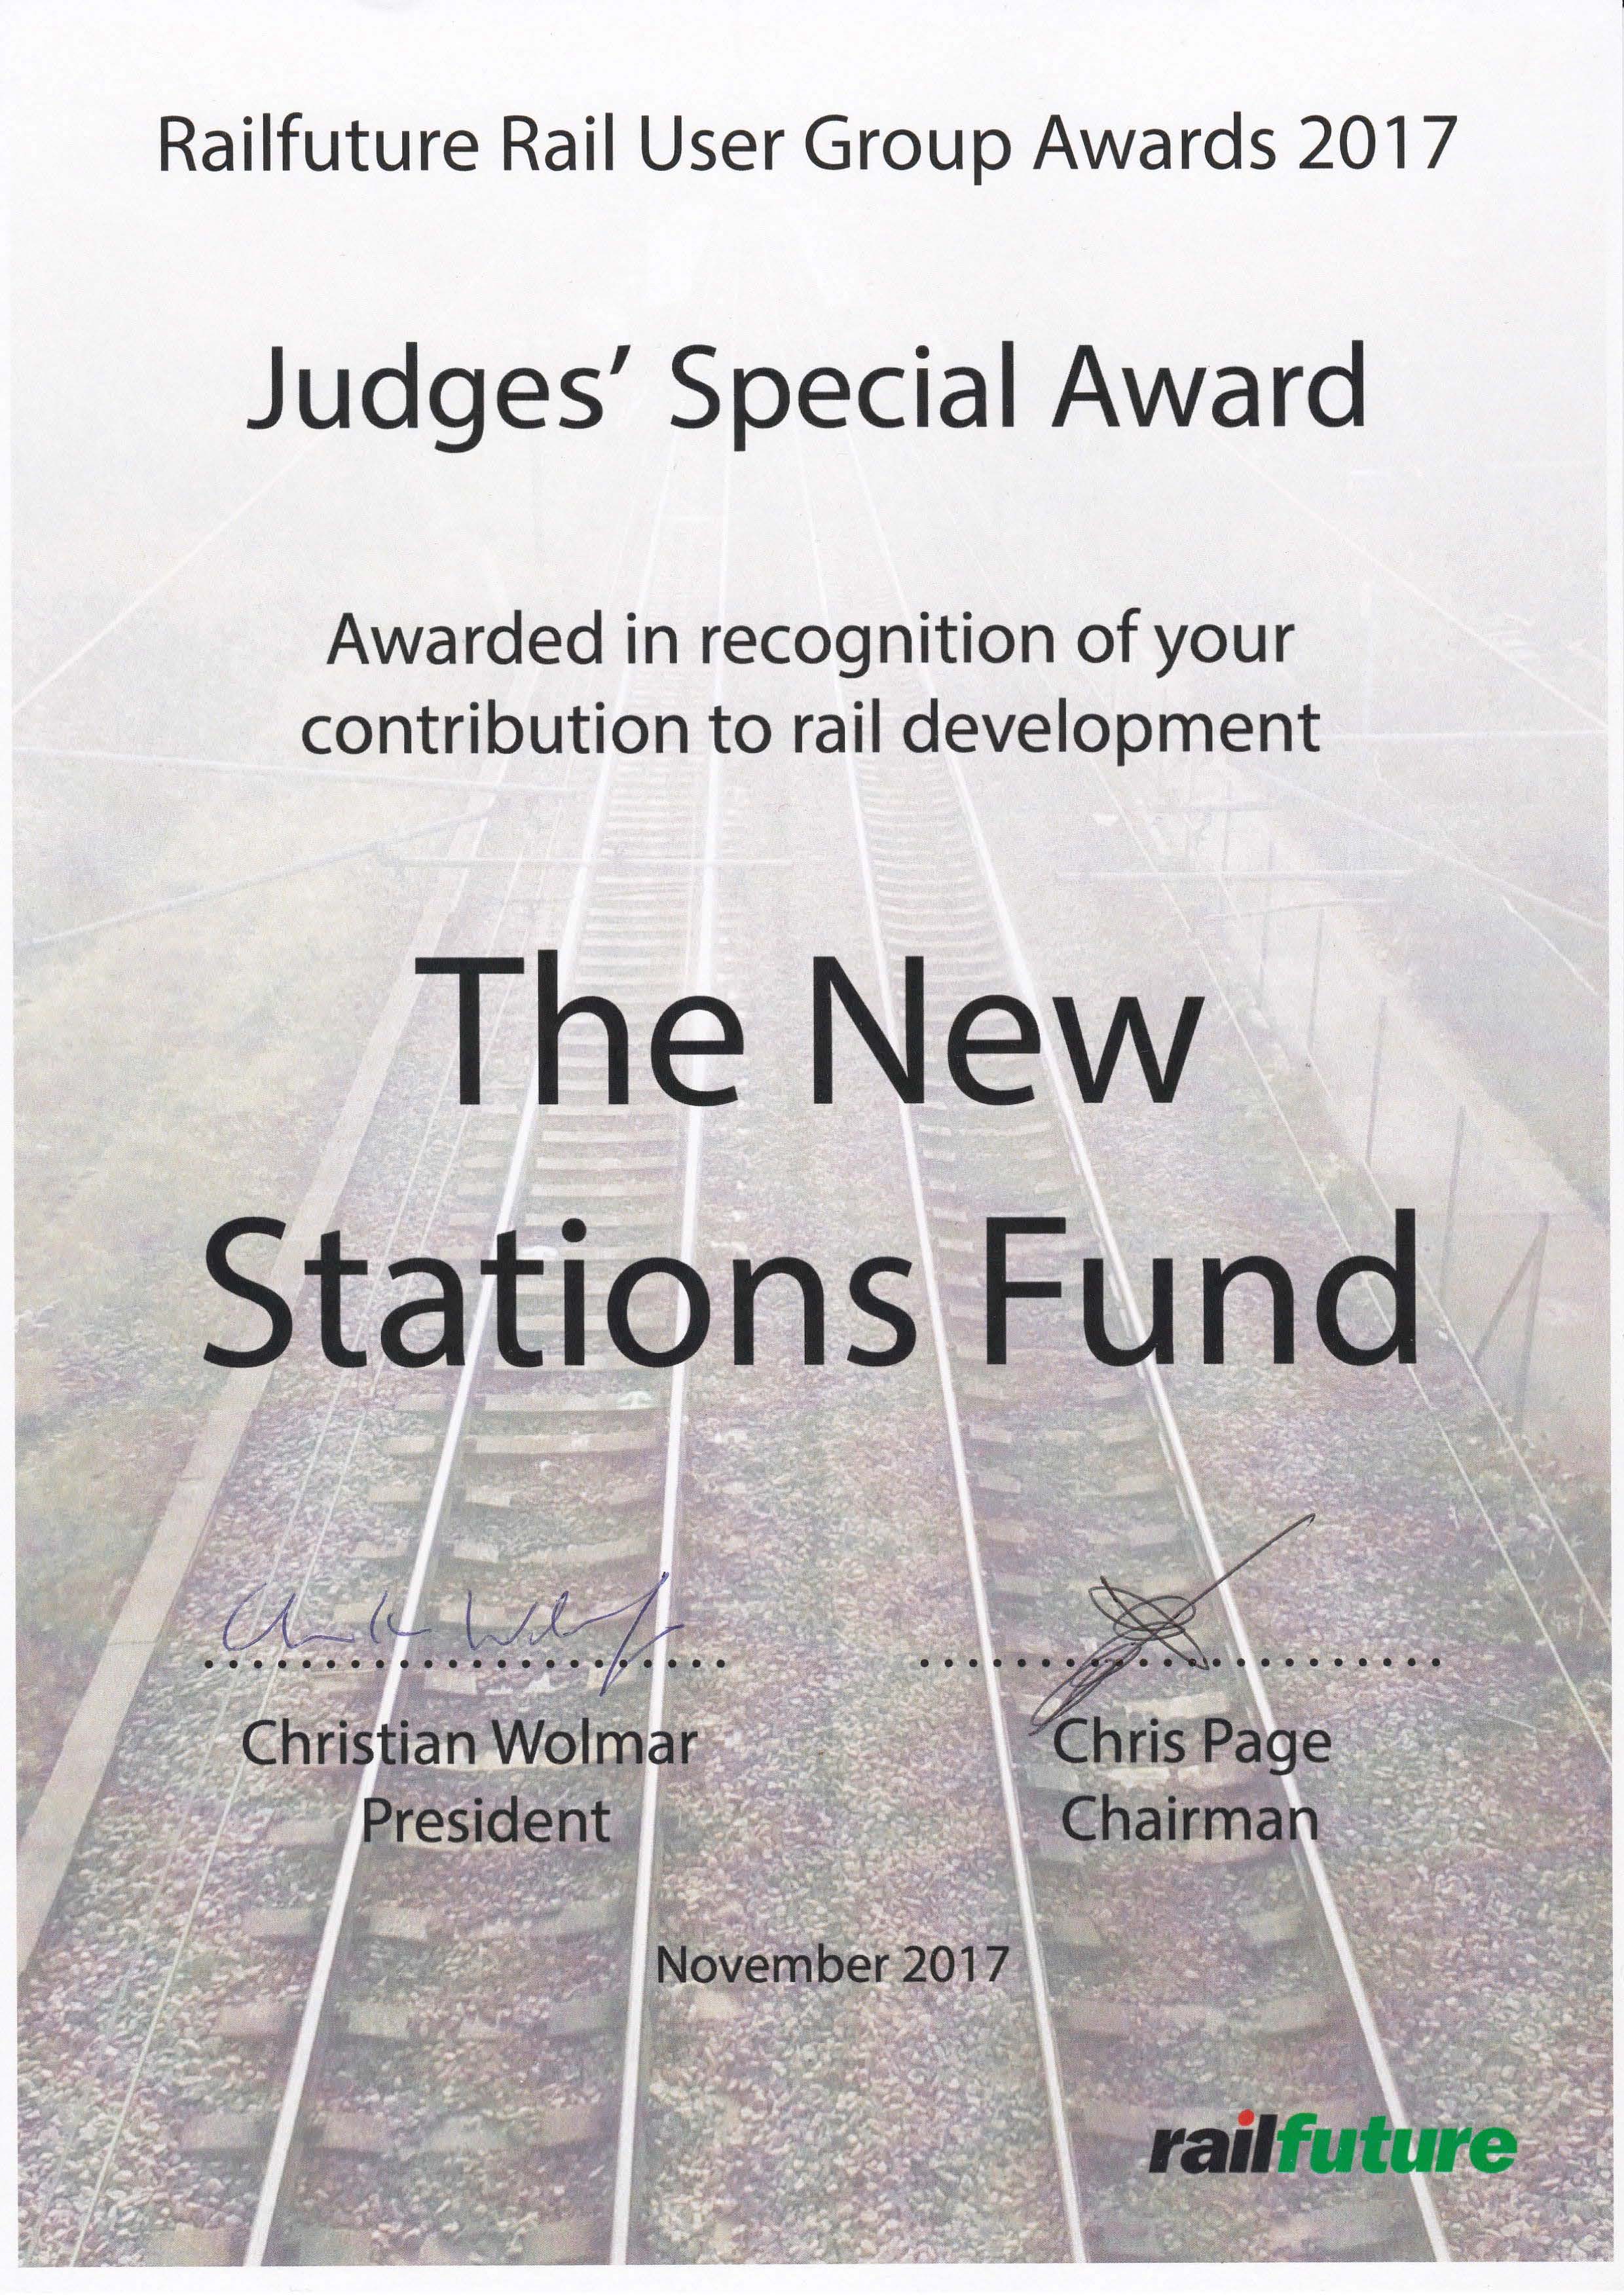 GPH:2017.11.04 - Judges' Special Award 2017 for New Stations Fund